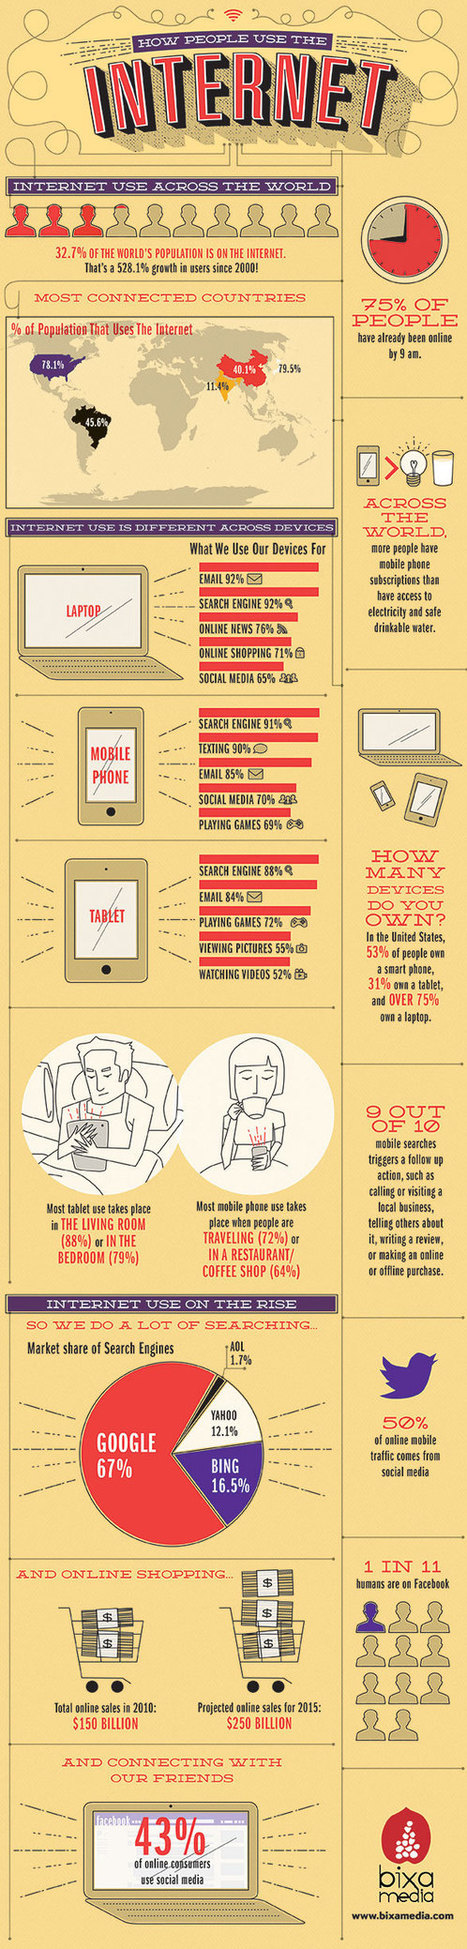 How People Use the Internet [INFOGRAPHIC] | Strictly pedagogical | Scoop.it